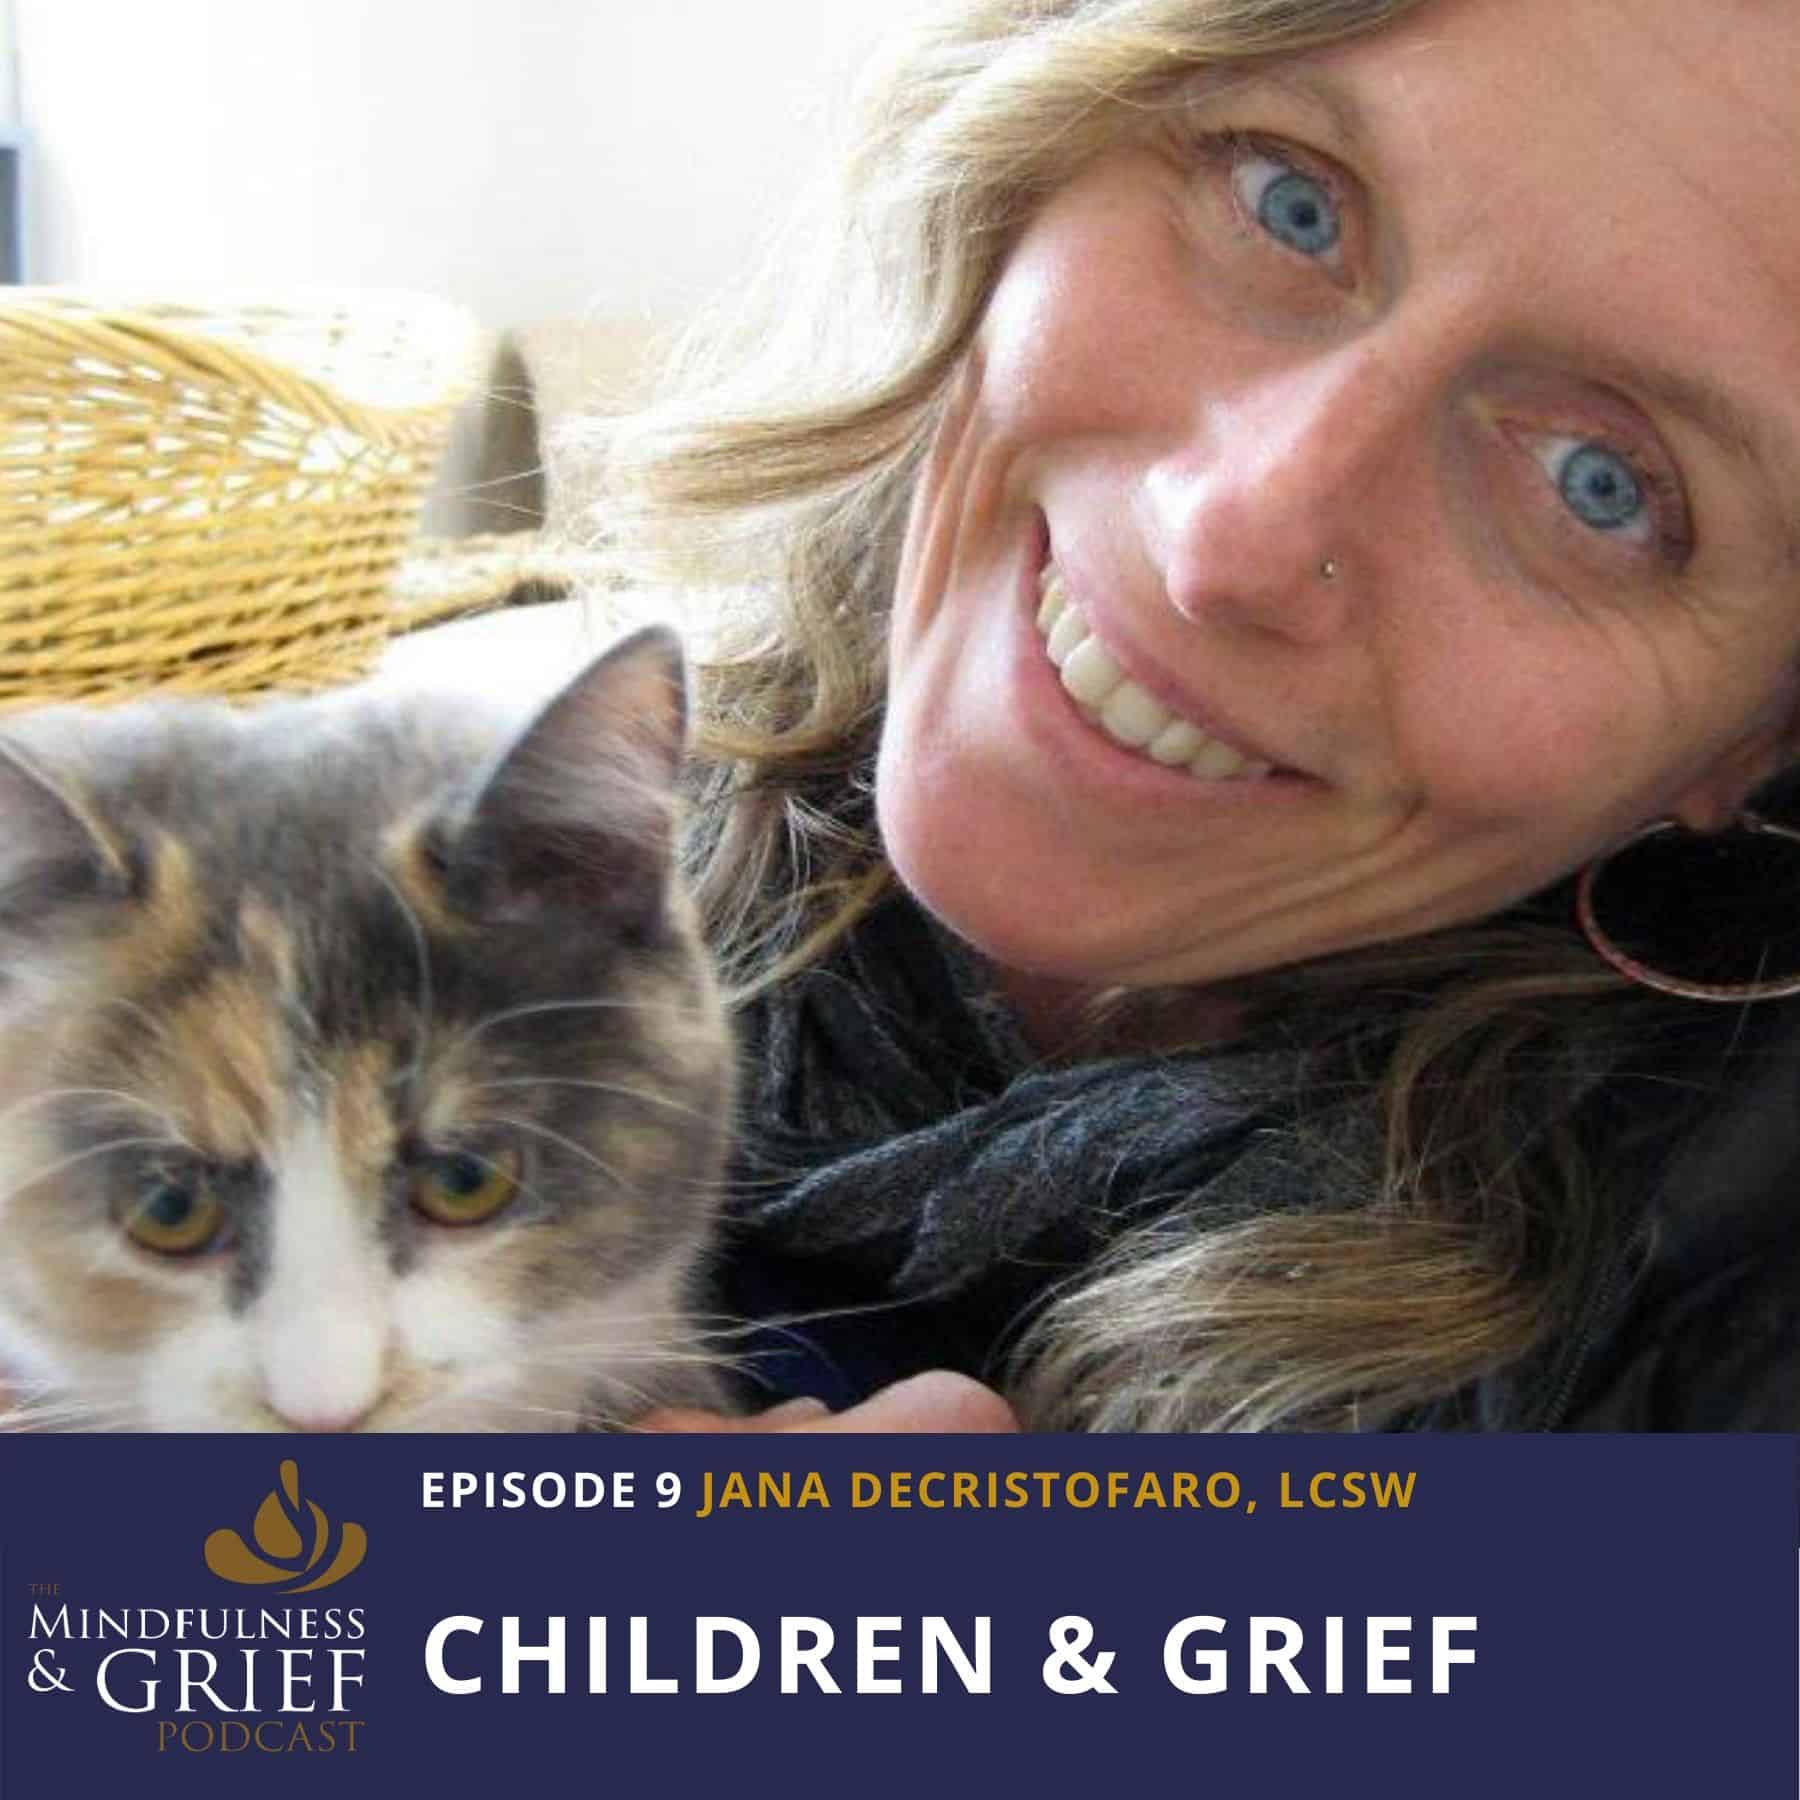 Children & Grief_ How To Help Kids Cope With Loss Early In Life with Jana DeCristofaro, LCSW